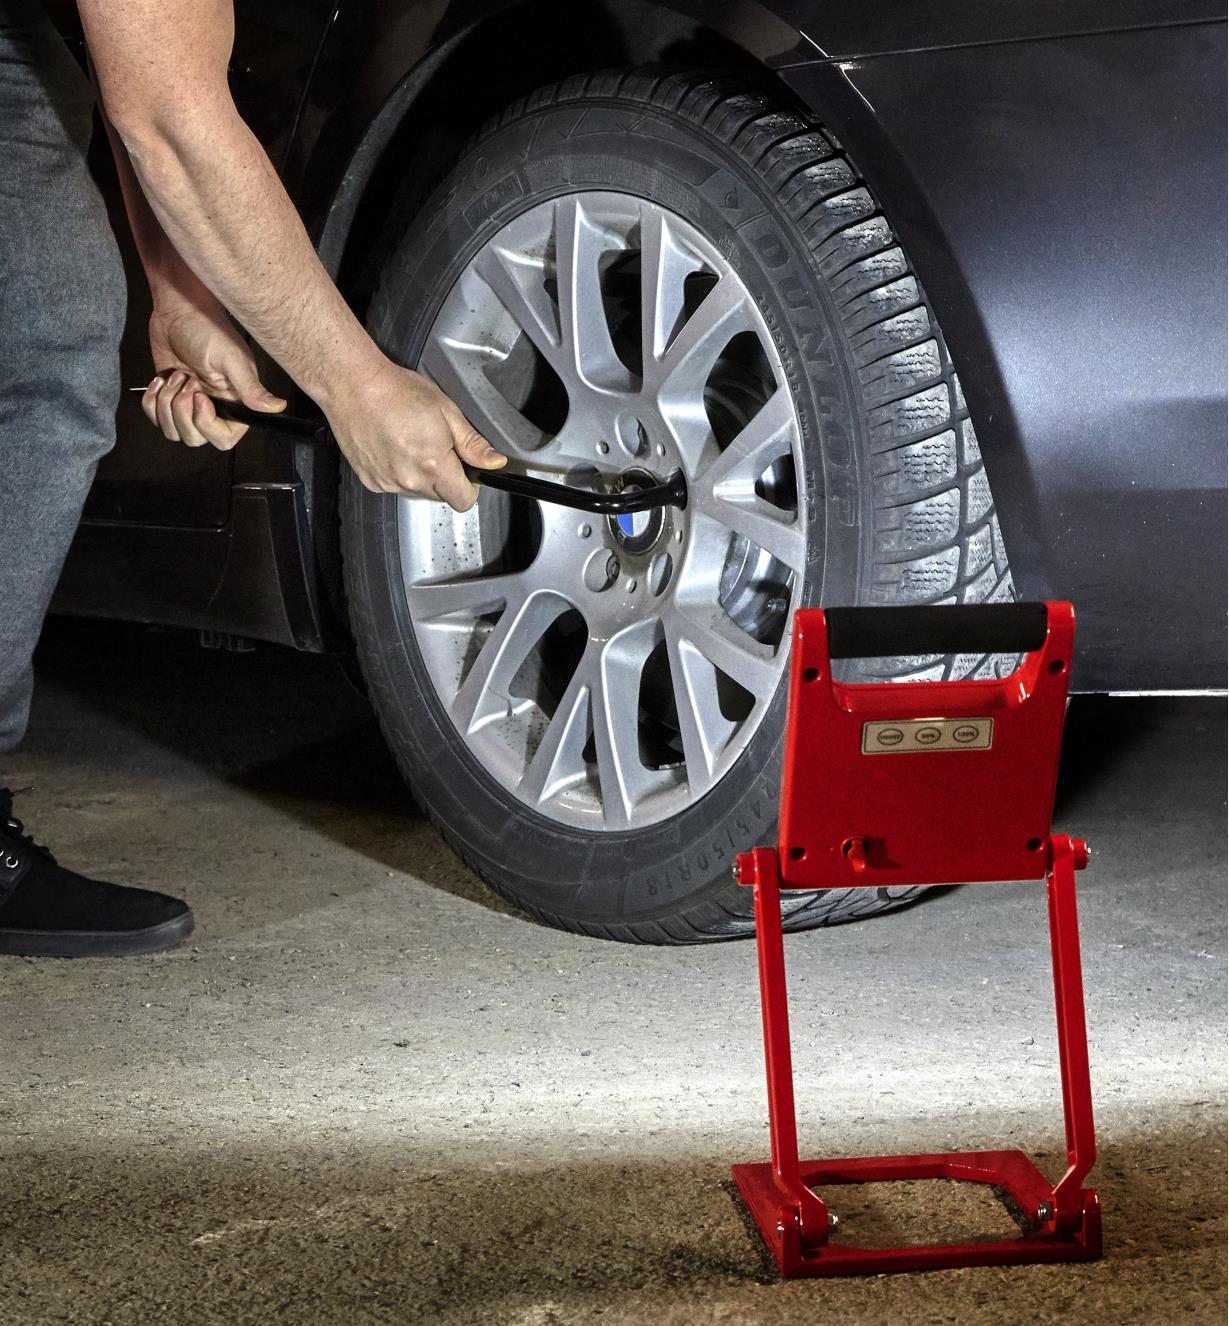 Using a folding rechargeable LED floodlight when changing a tire at night